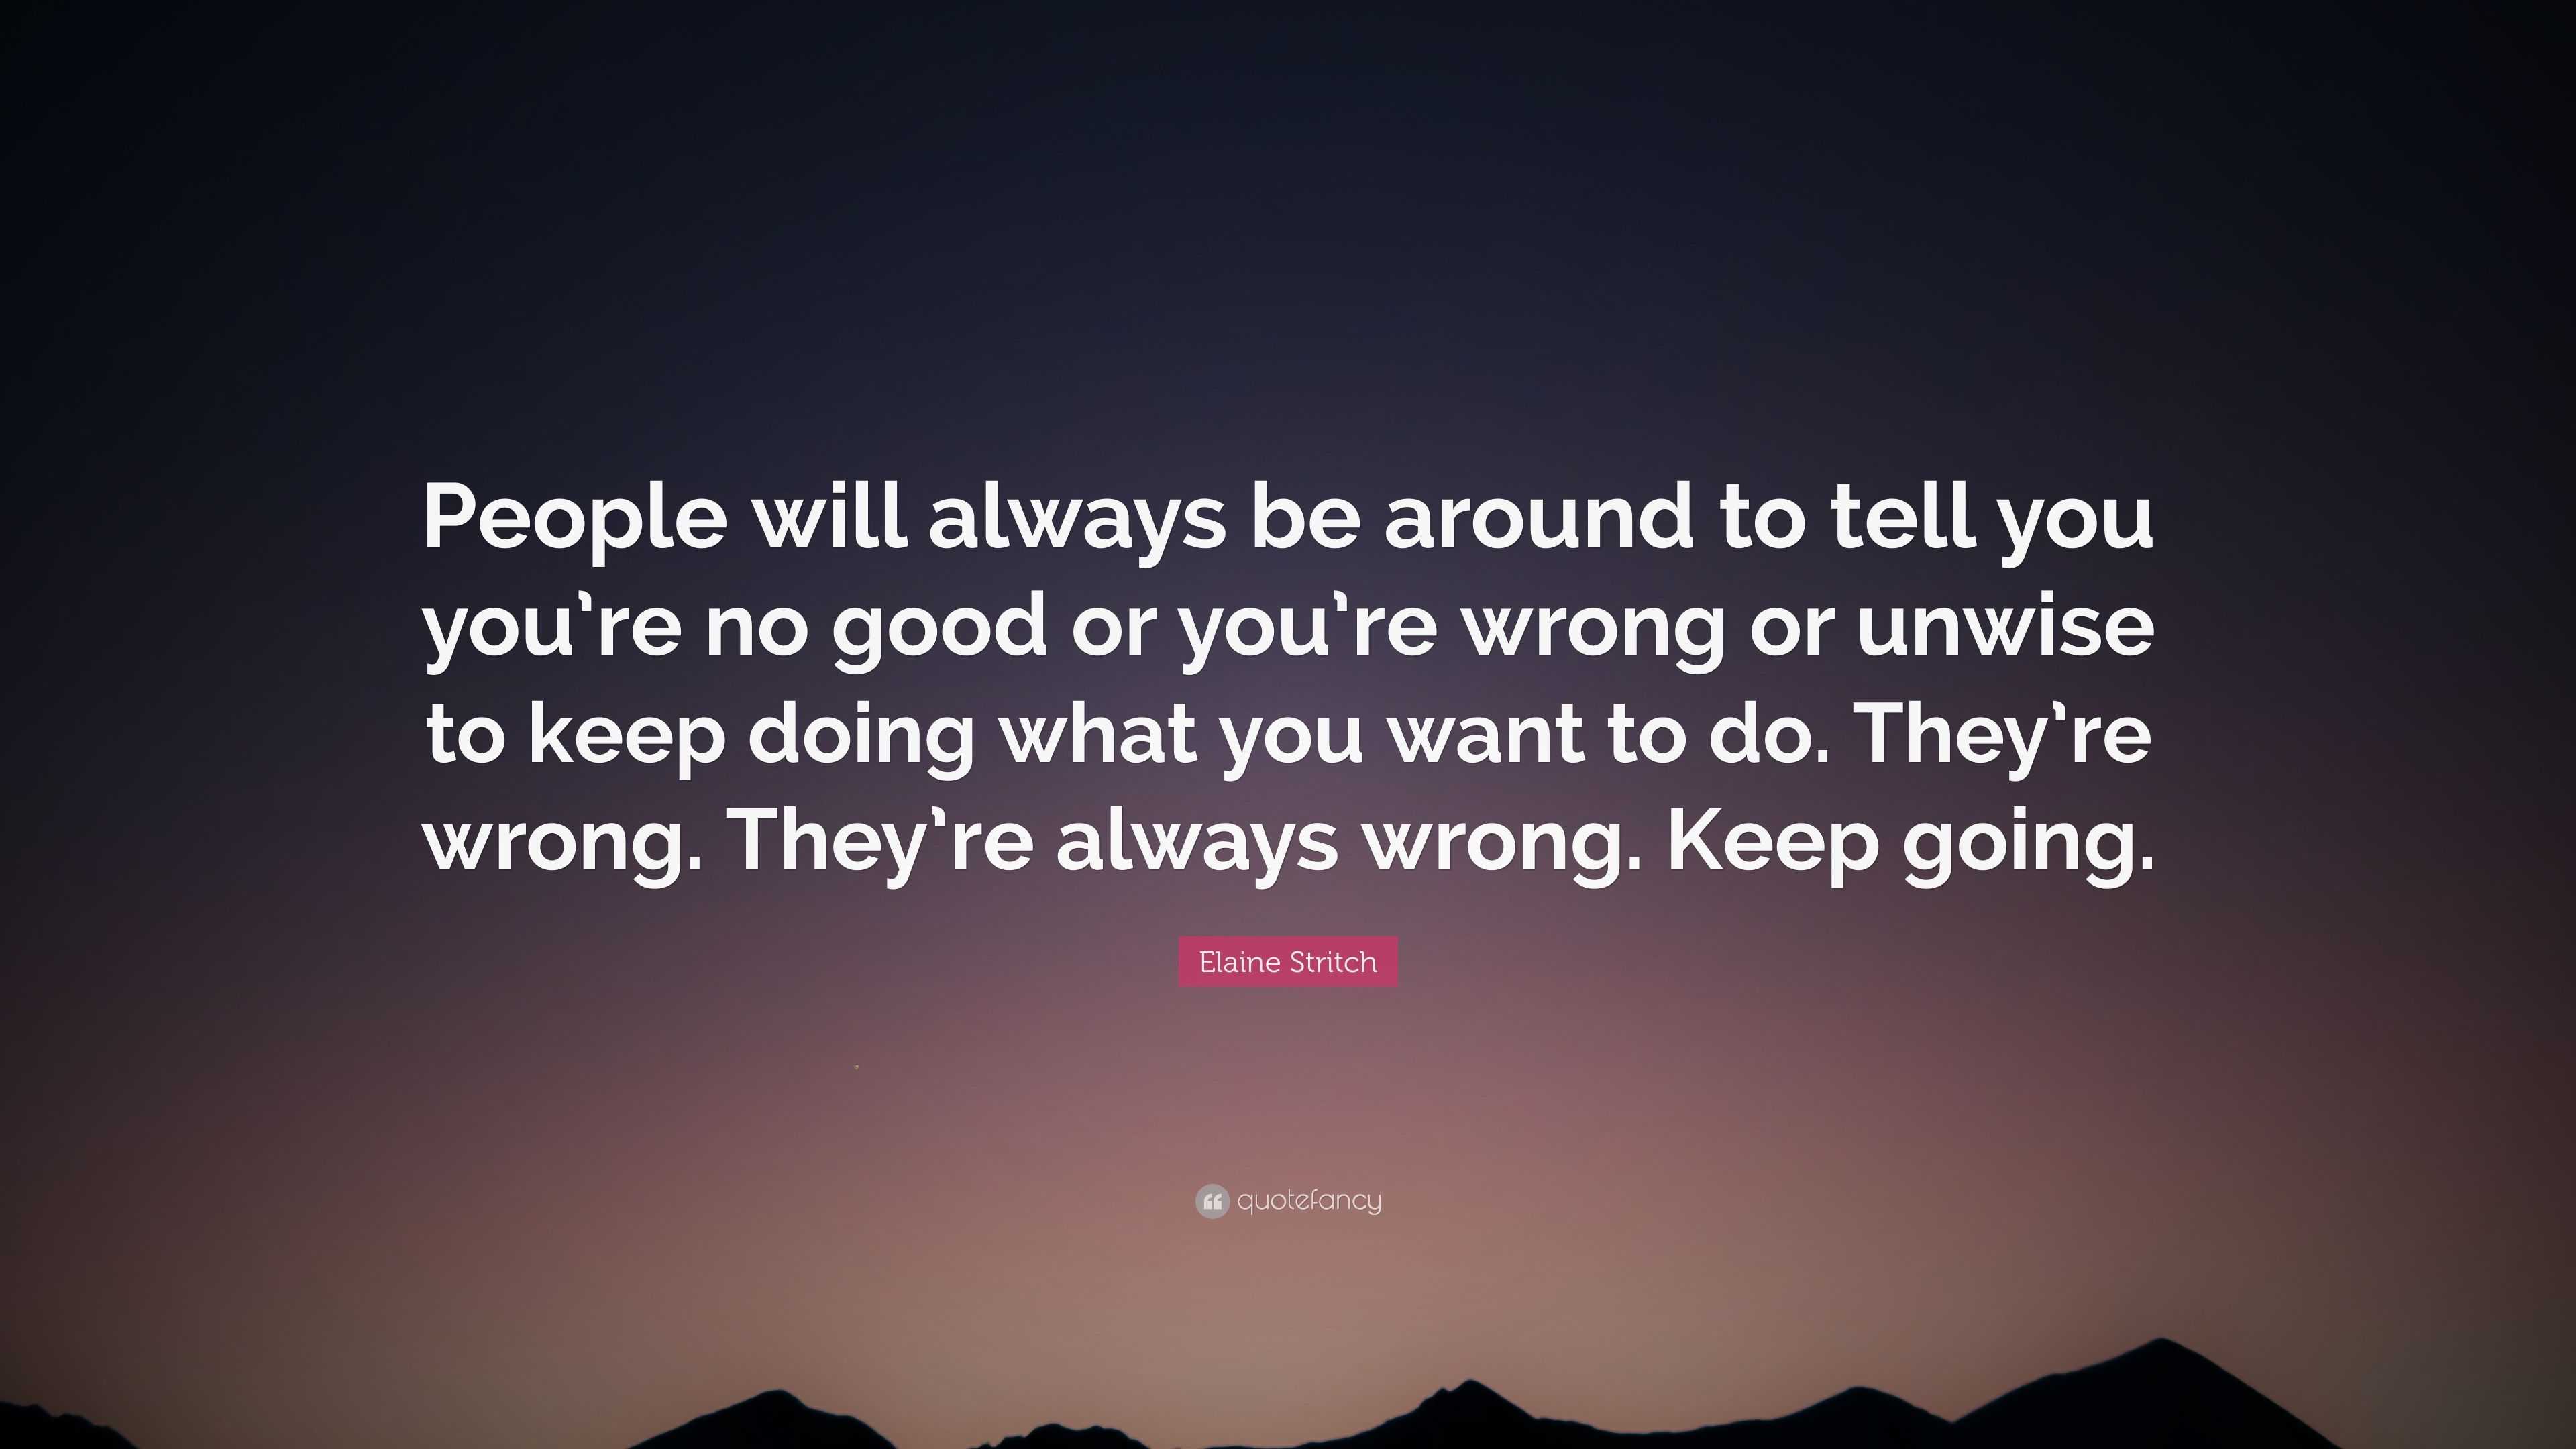 Elaine Stritch Quote: "People will always be around to ...